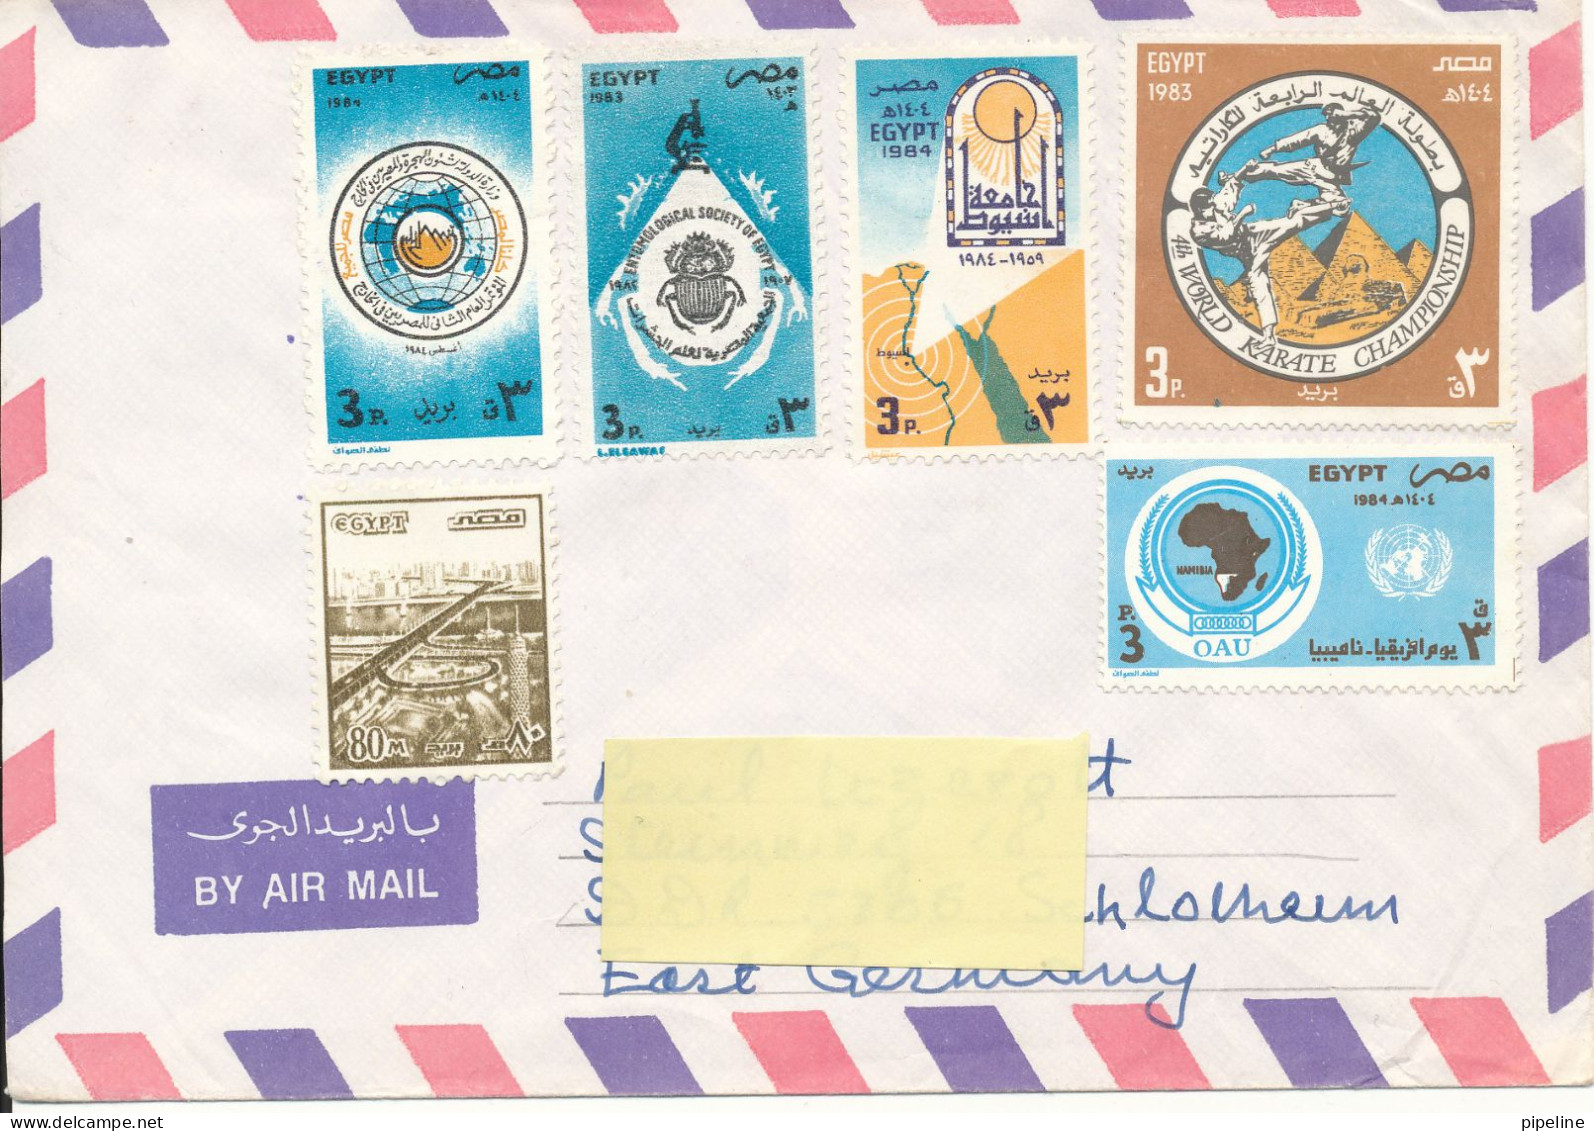 Egypt Air Mail Cover Sent To Germany DDR Topic Stamps No Postmarks On Stamps Or Cover - Posta Aerea